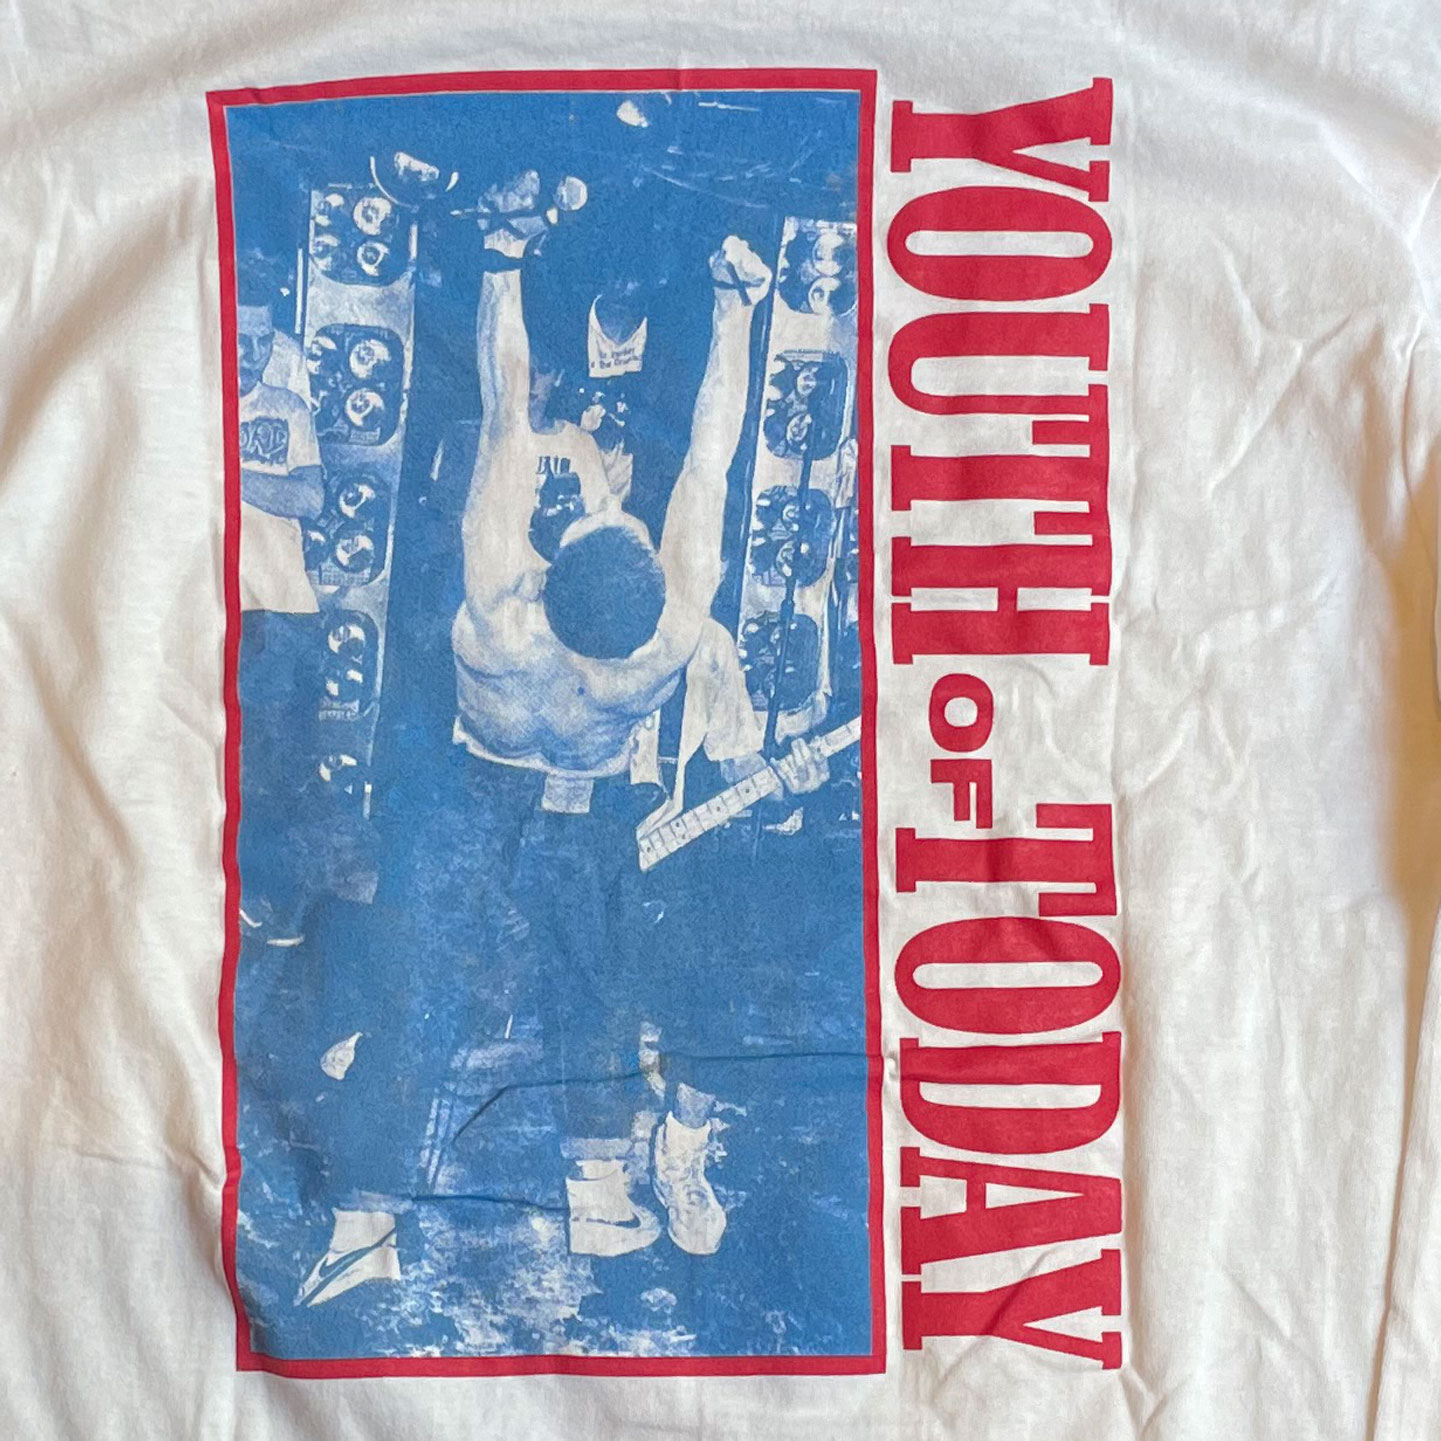 YOUTH OF TODAY ロングスリーブTシャツ PHOTO